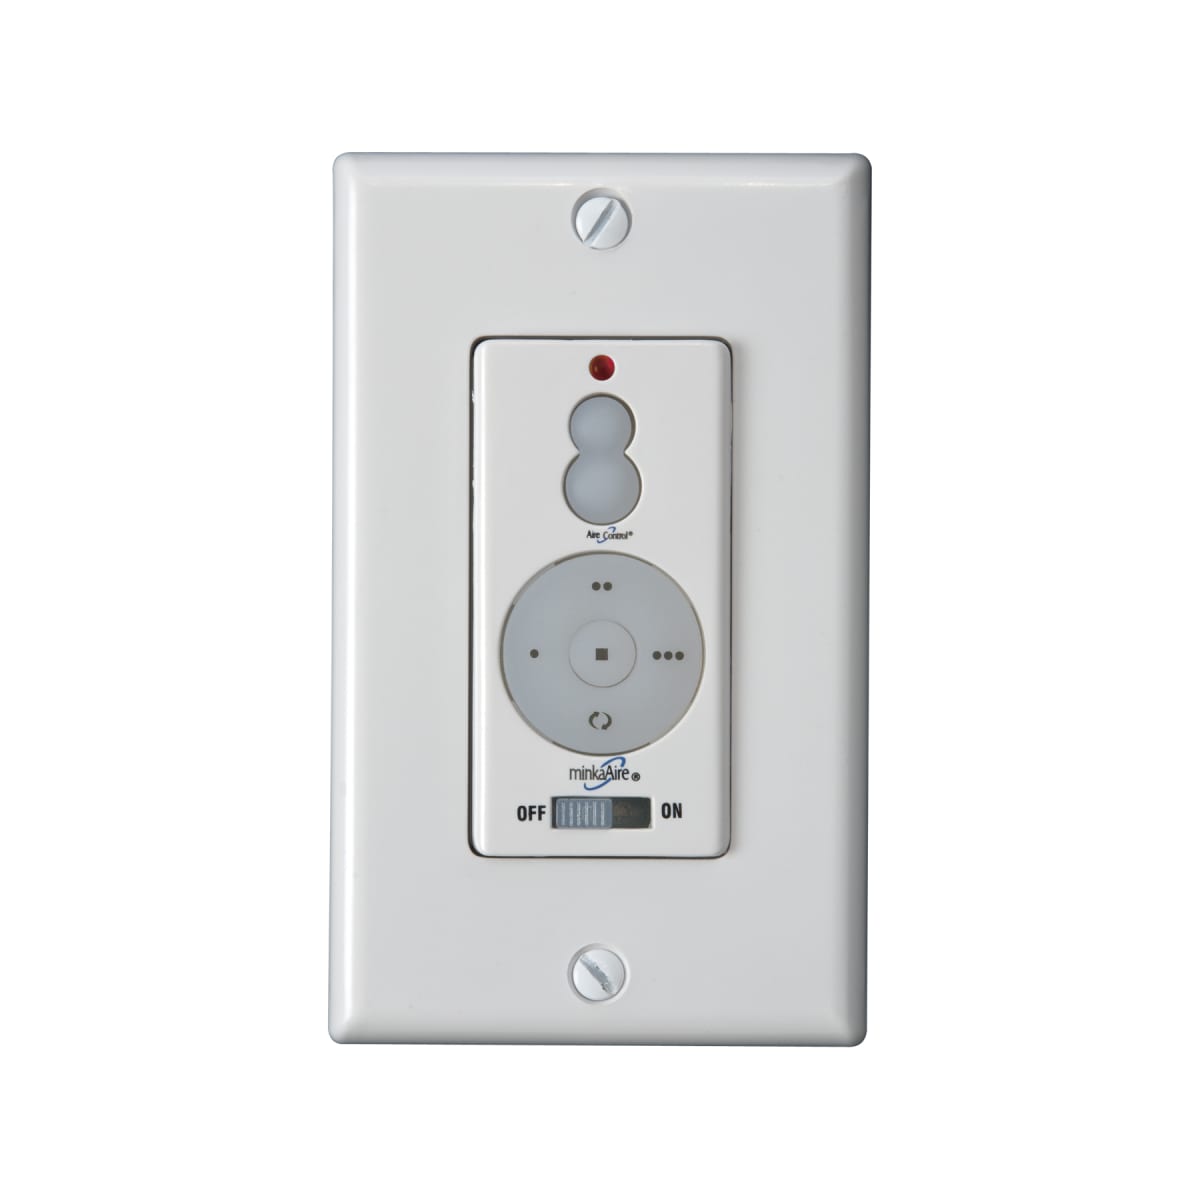 Minkaaire Wc210 Wall Mount Airecontrol